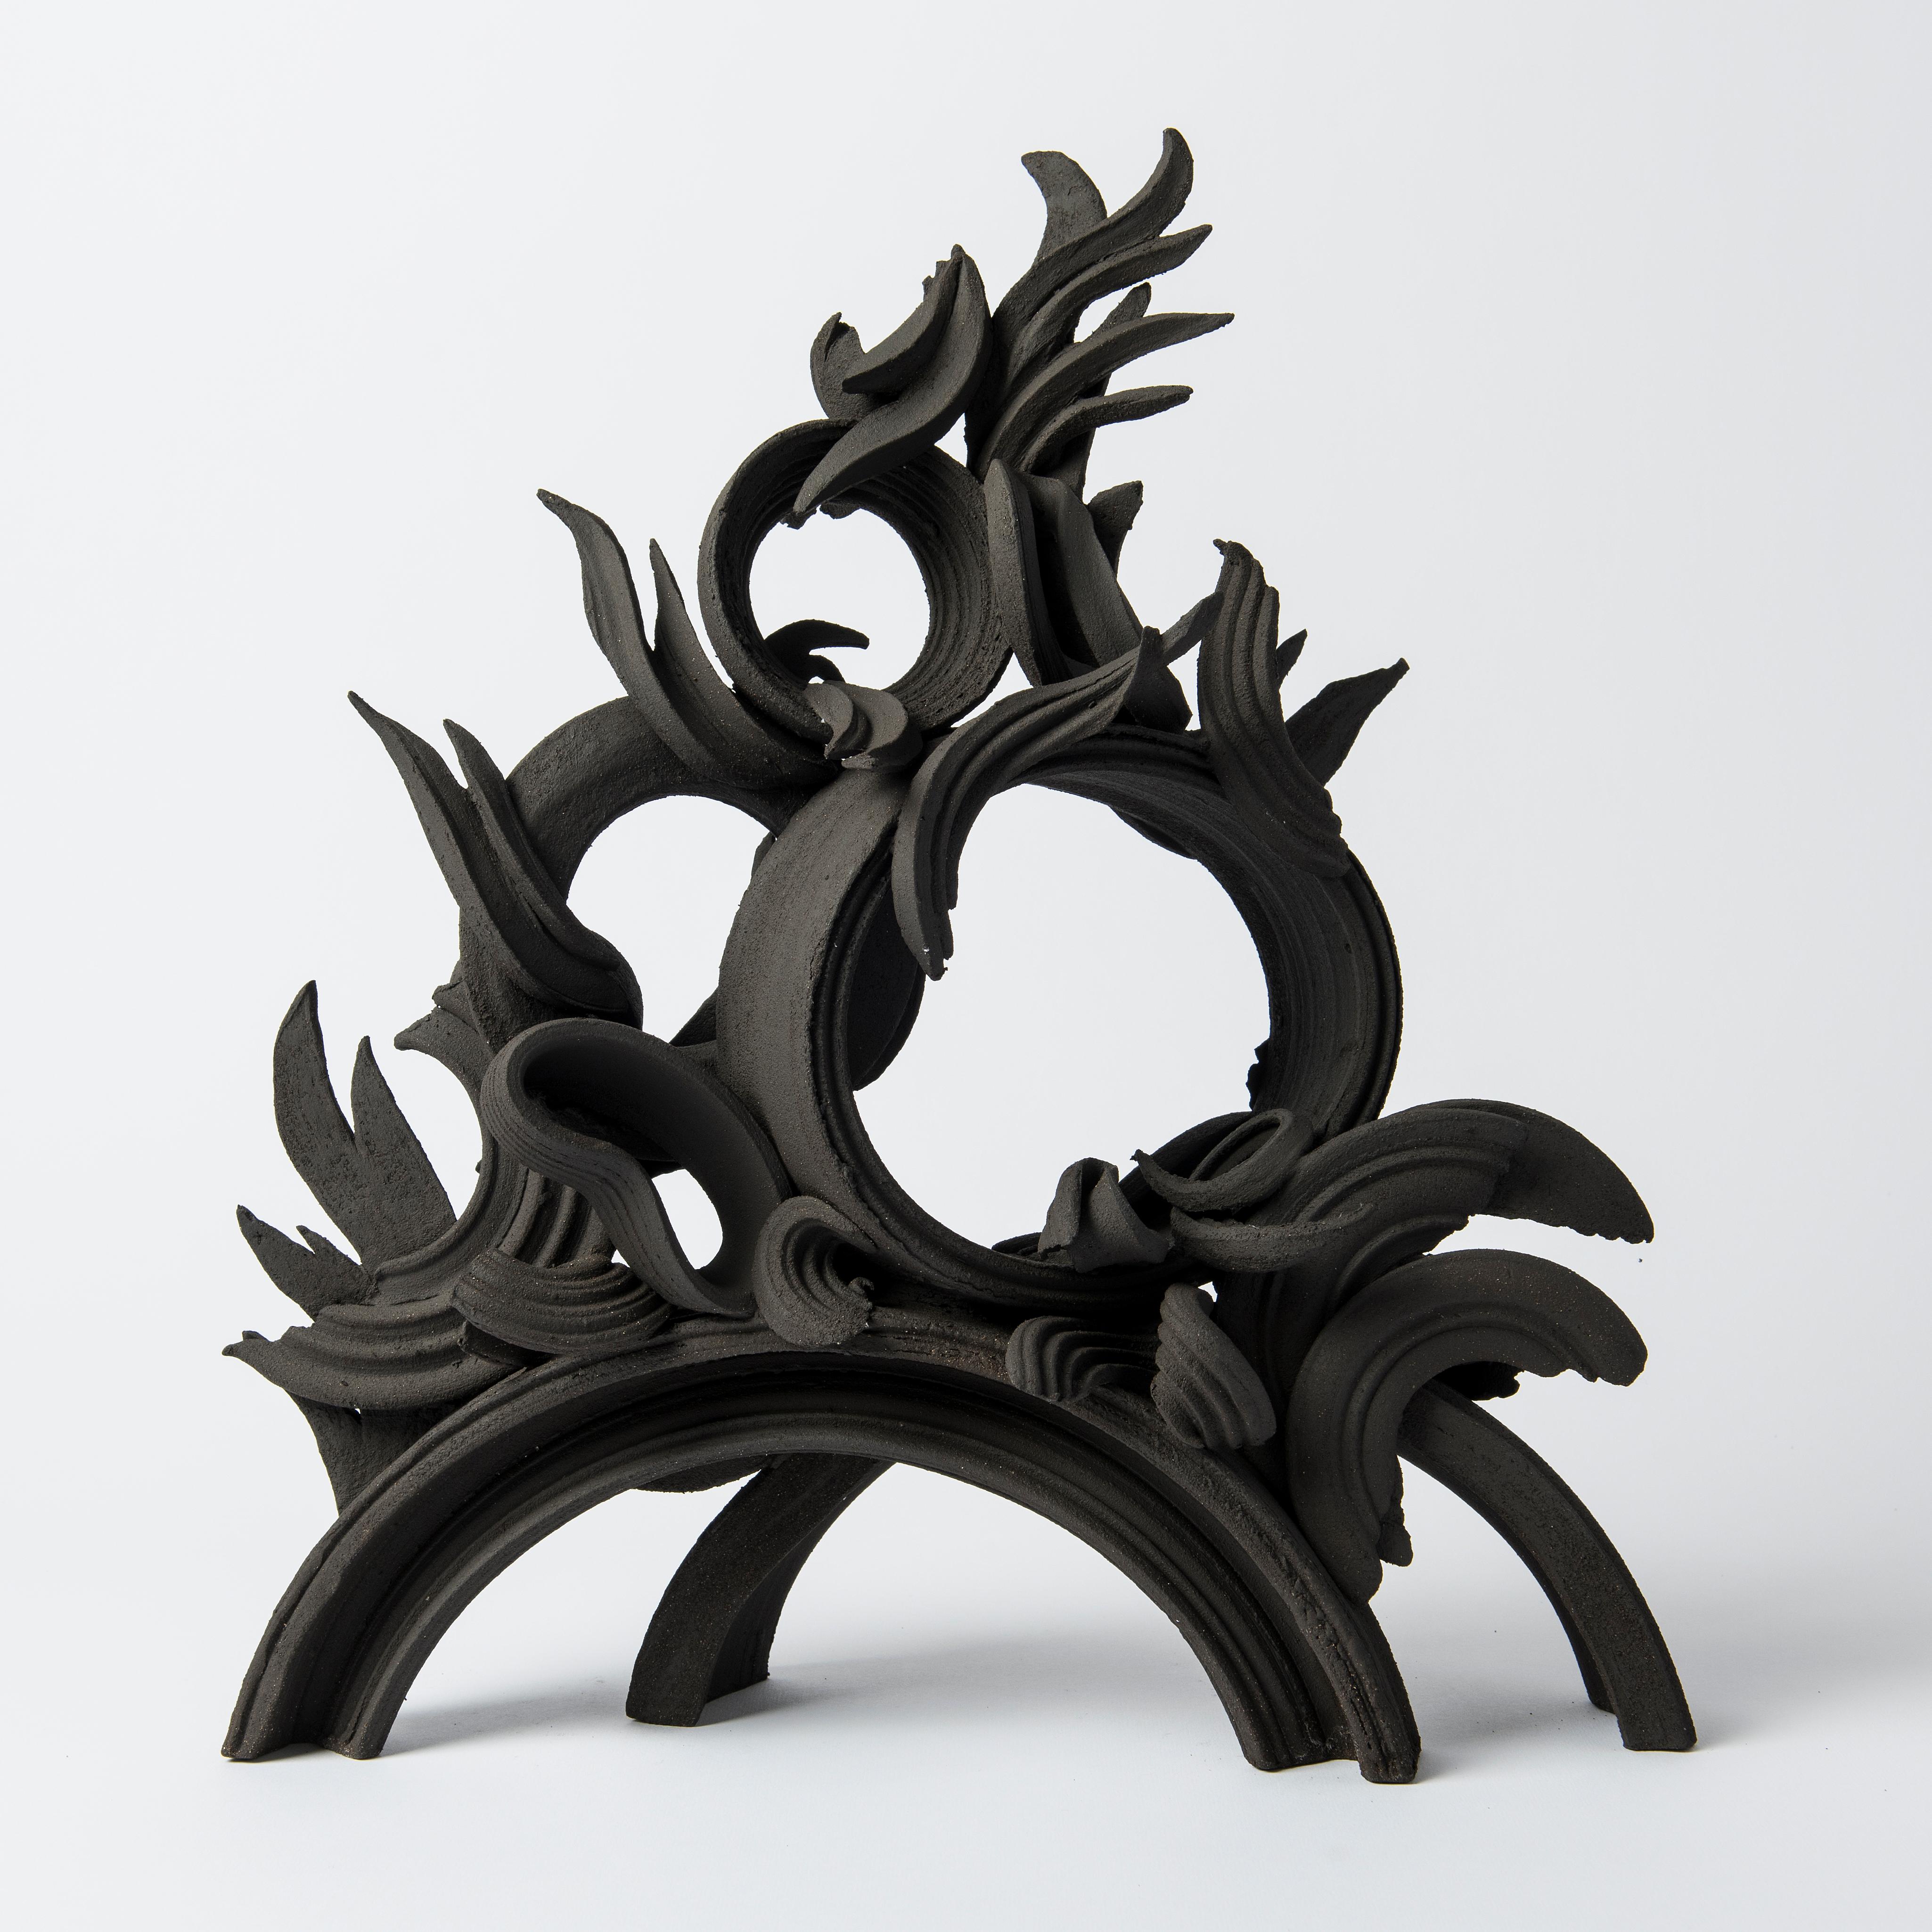 Piceous III is a unique handmade black stoneware ceramic sculpture by the British artist Jo Taylor. A completely hand-built artwork created from architectural-inspired flourishes and swirls. 

For Taylor, the making process hugely influences the